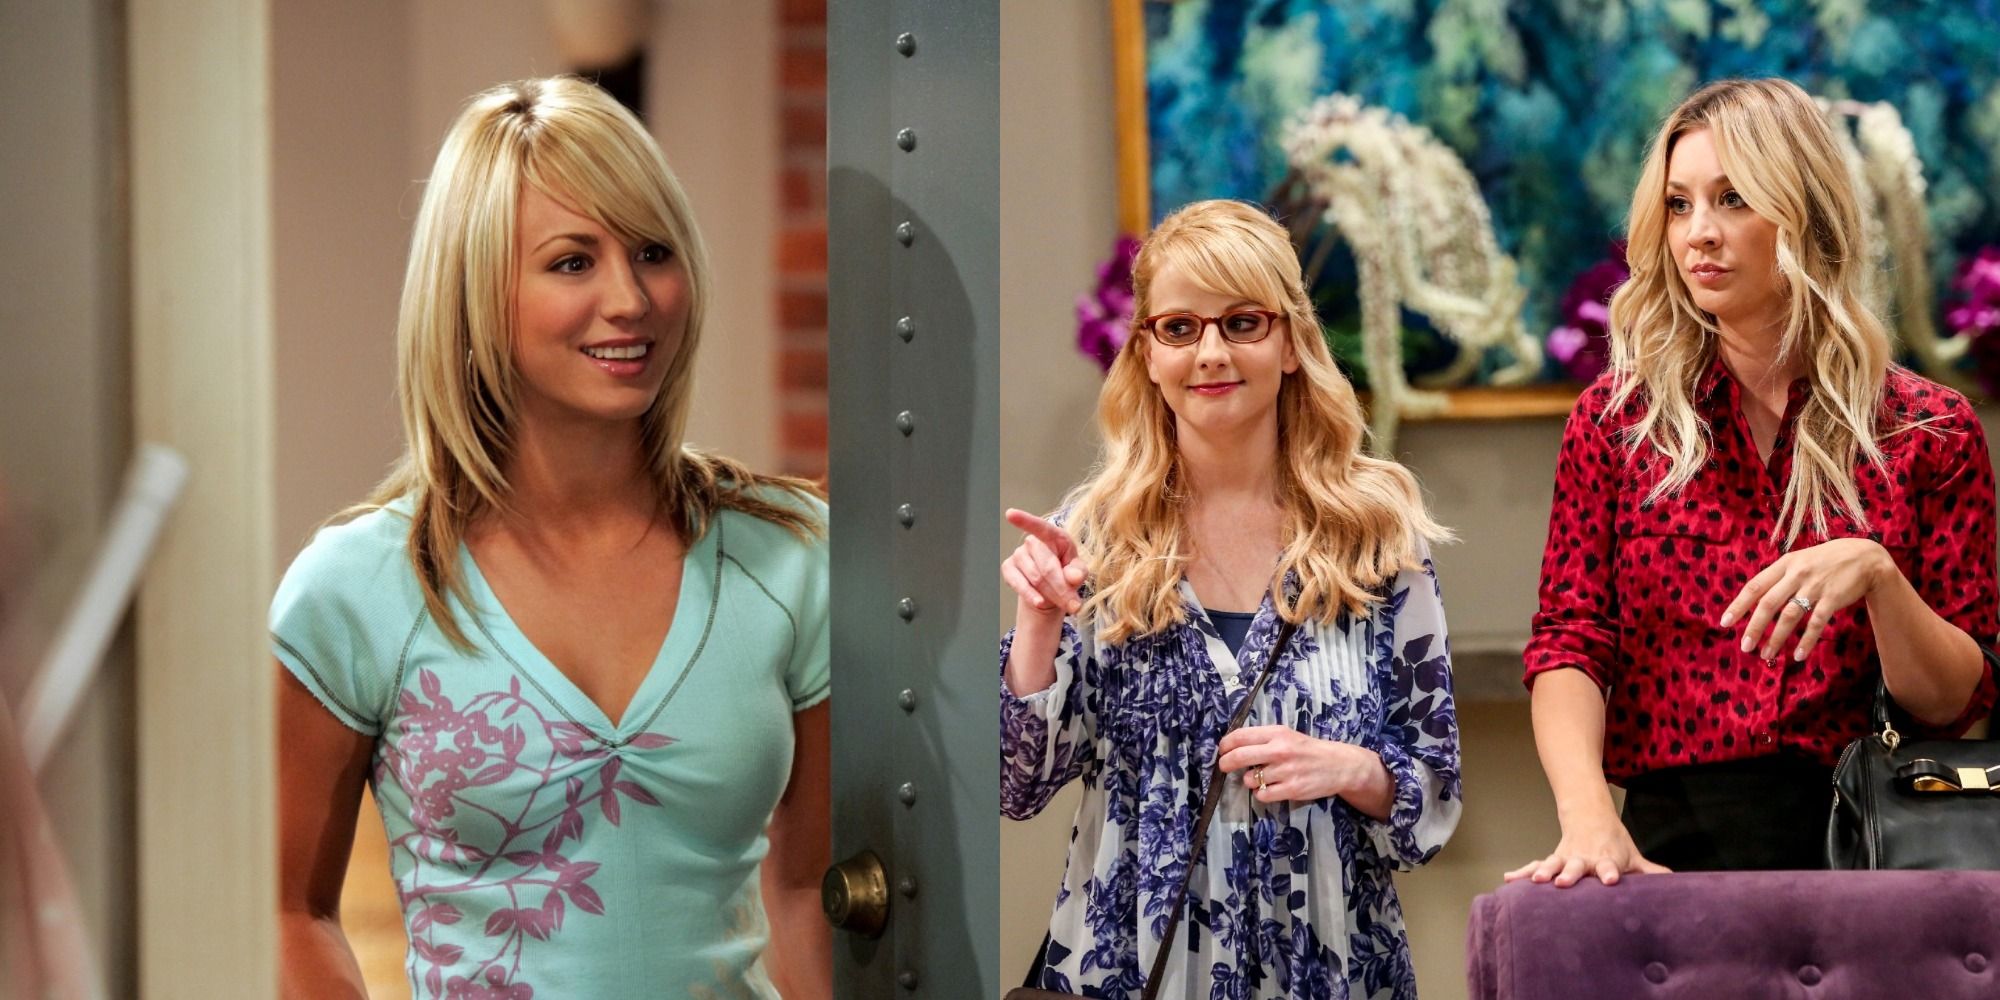 Split image - Penny smiling in a doorway from Season 1 / Bernadette and Penny grinning in Season 12 of The Big Bang Theory